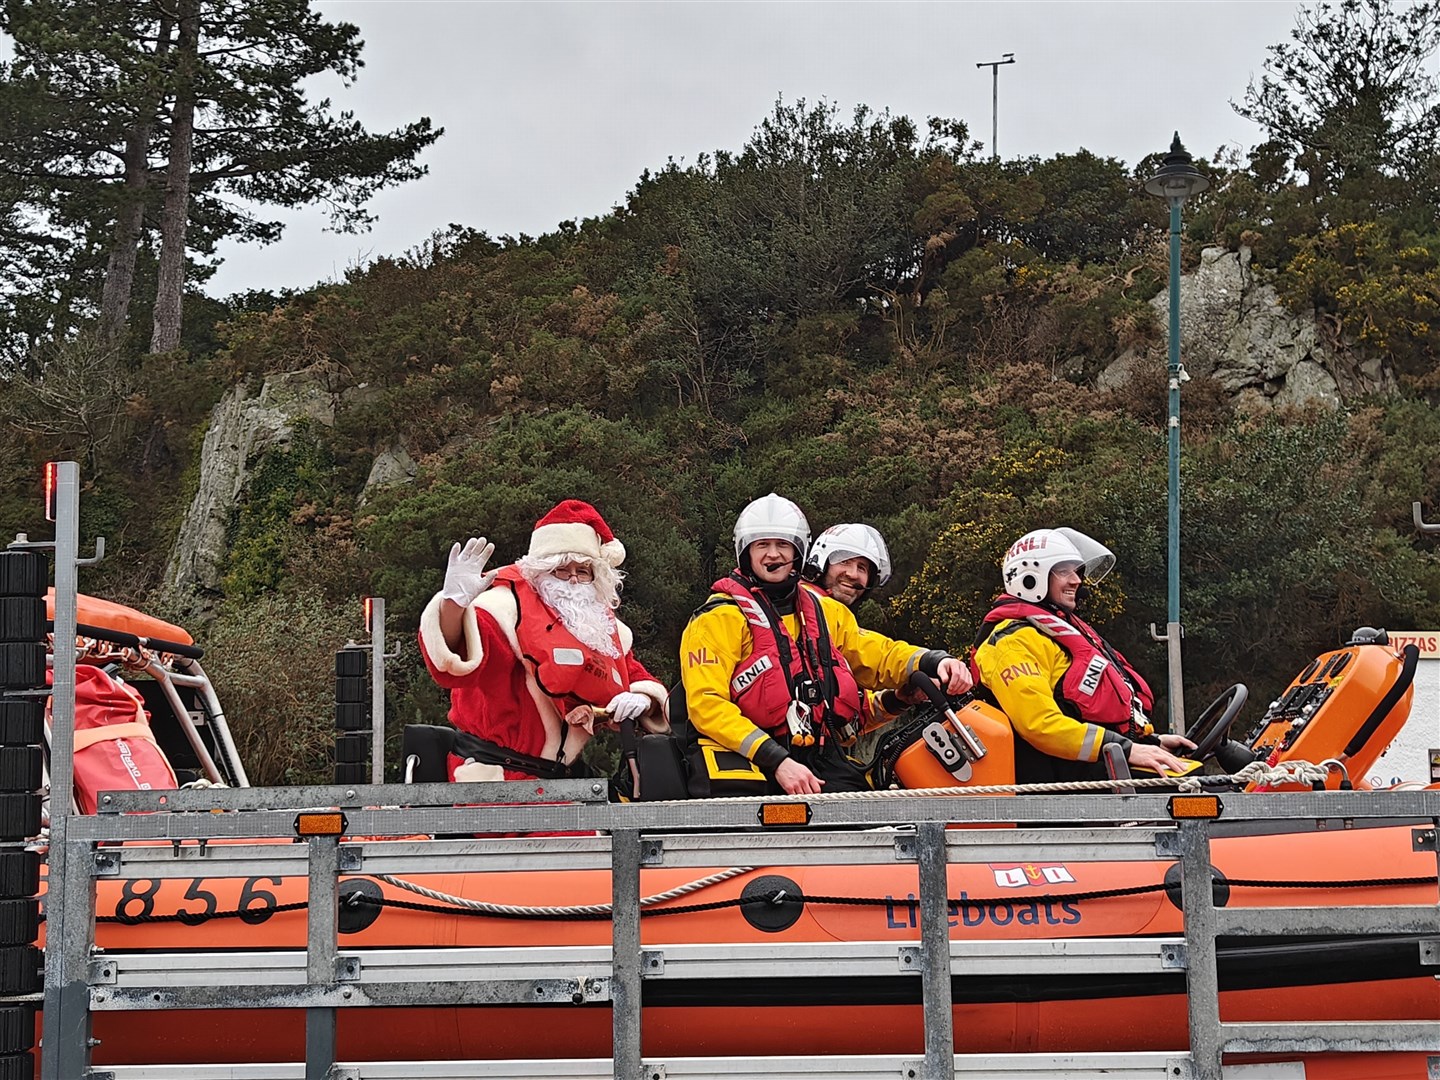 Santa makes a welcome arrival. Picture: Kyle RNLI